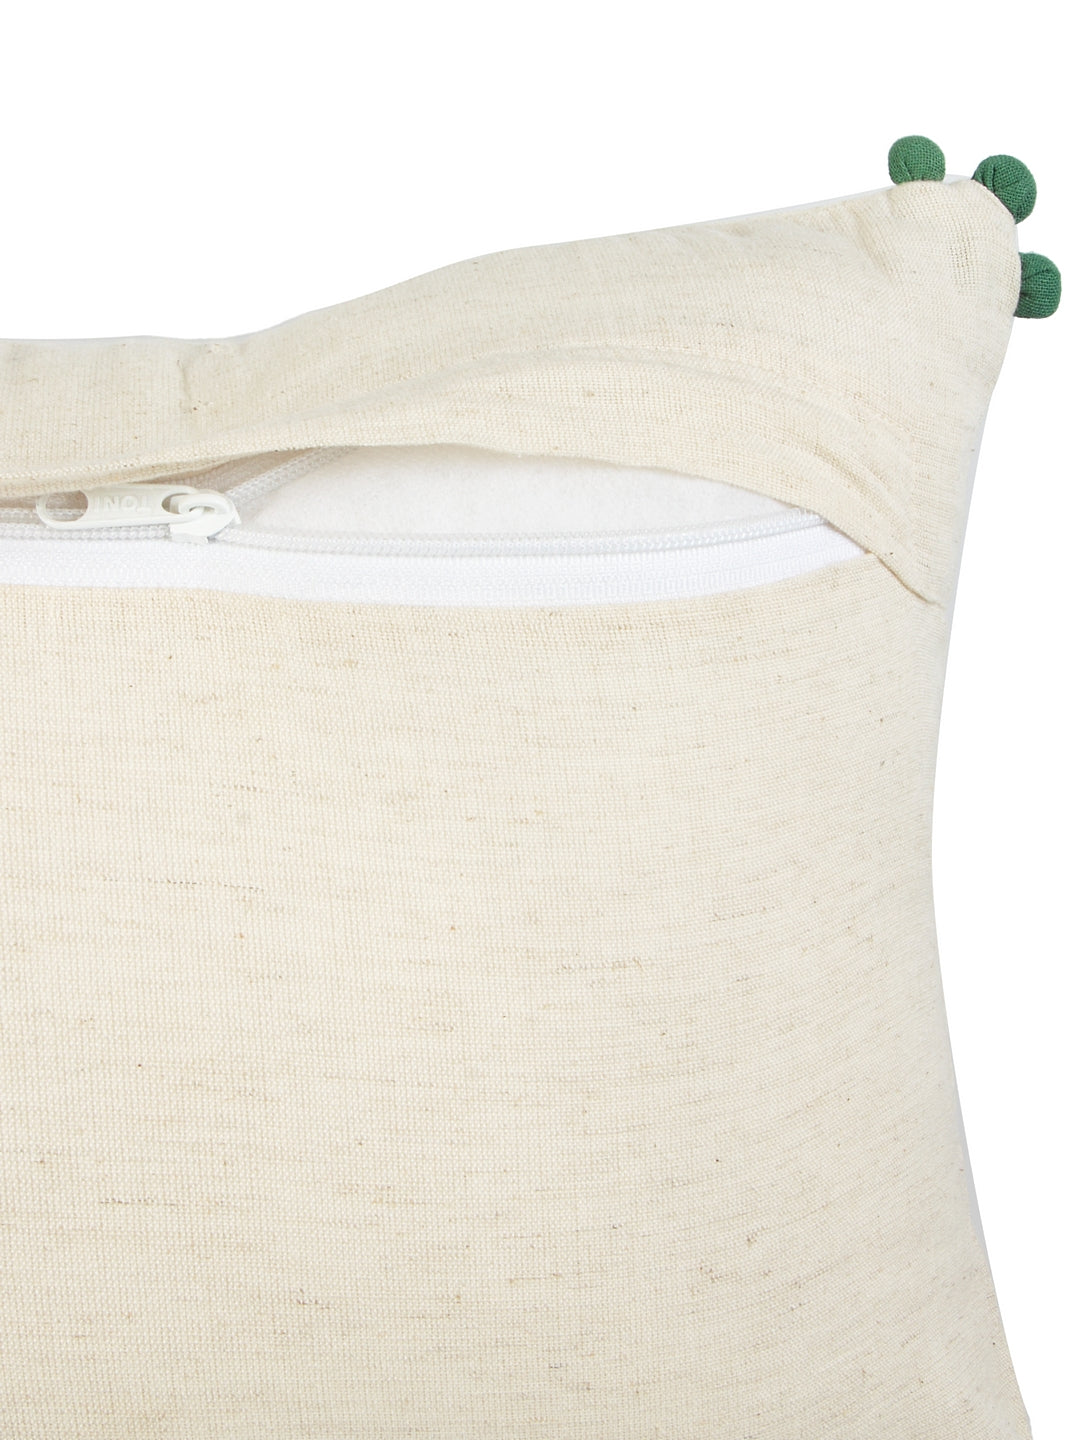 Blanc9 Bead Embroidery Cushion Cover with Filler 30x50cm